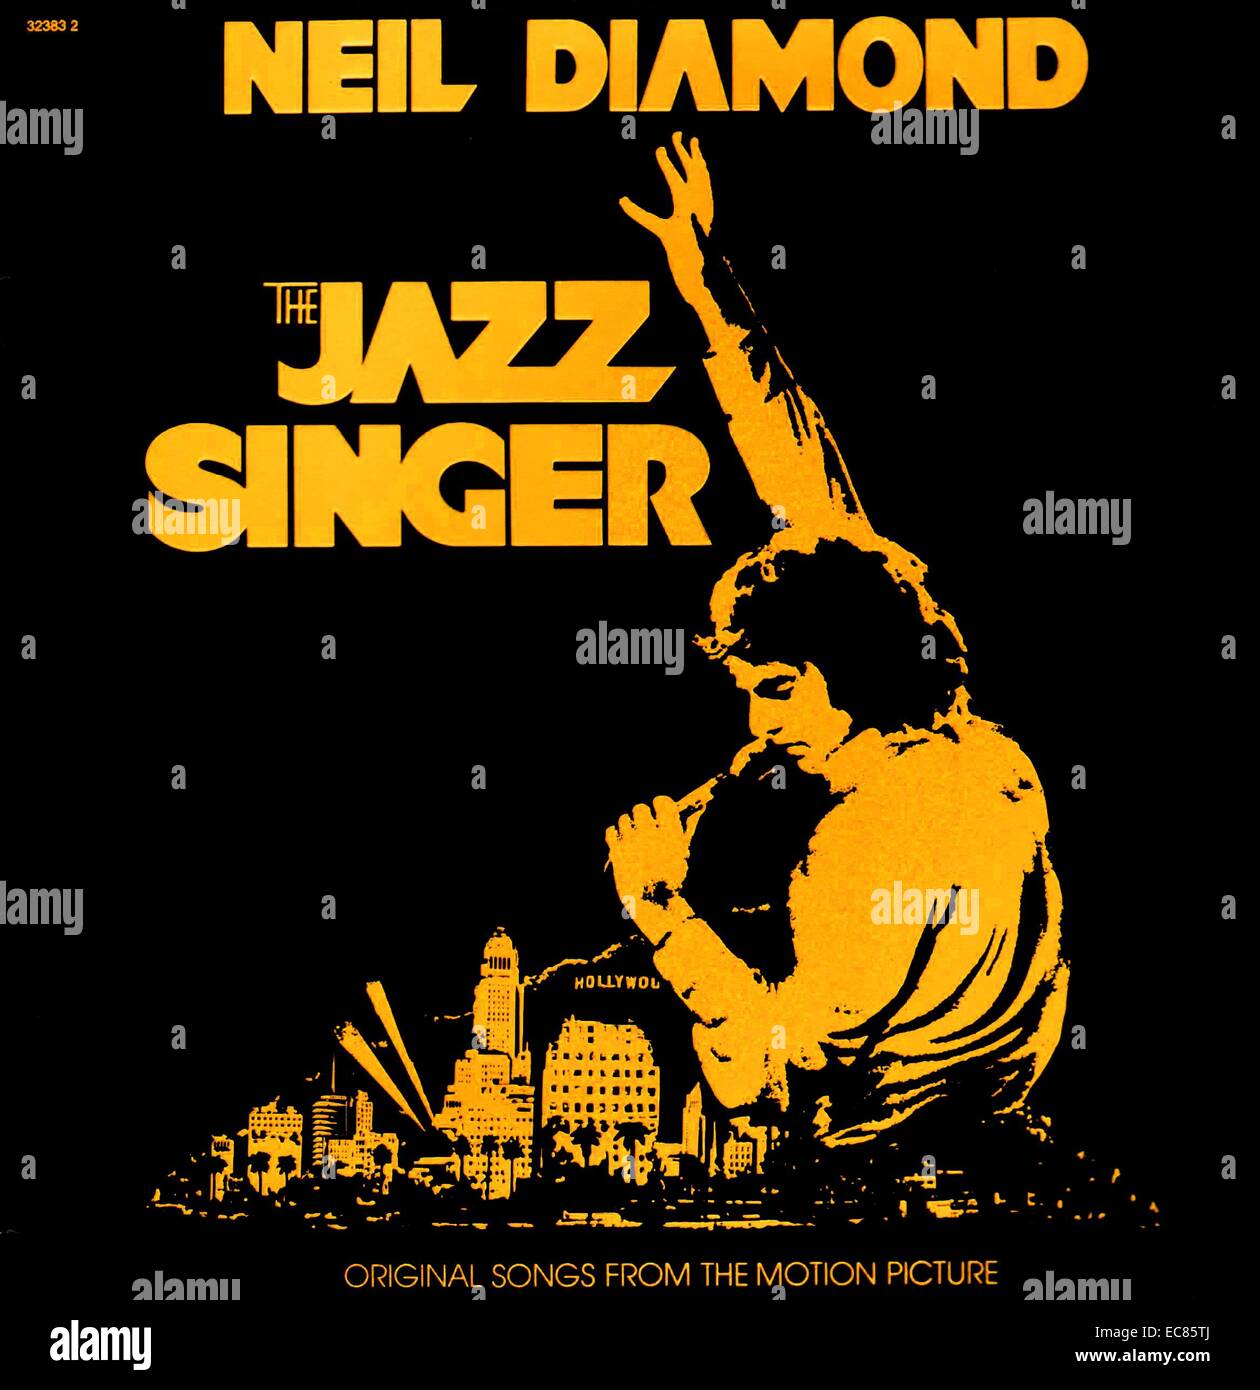 The Jazz Singer is a 1980 American drama film and a remake of the 1927 classic The Jazz Singer; released by EMI Films and United Artists. It starred Neil Diamond; Laurence Olivier; and Lucie Arnaz and was co-directed by Richard Fleischer and Sidney J. Furie. Stock Photo